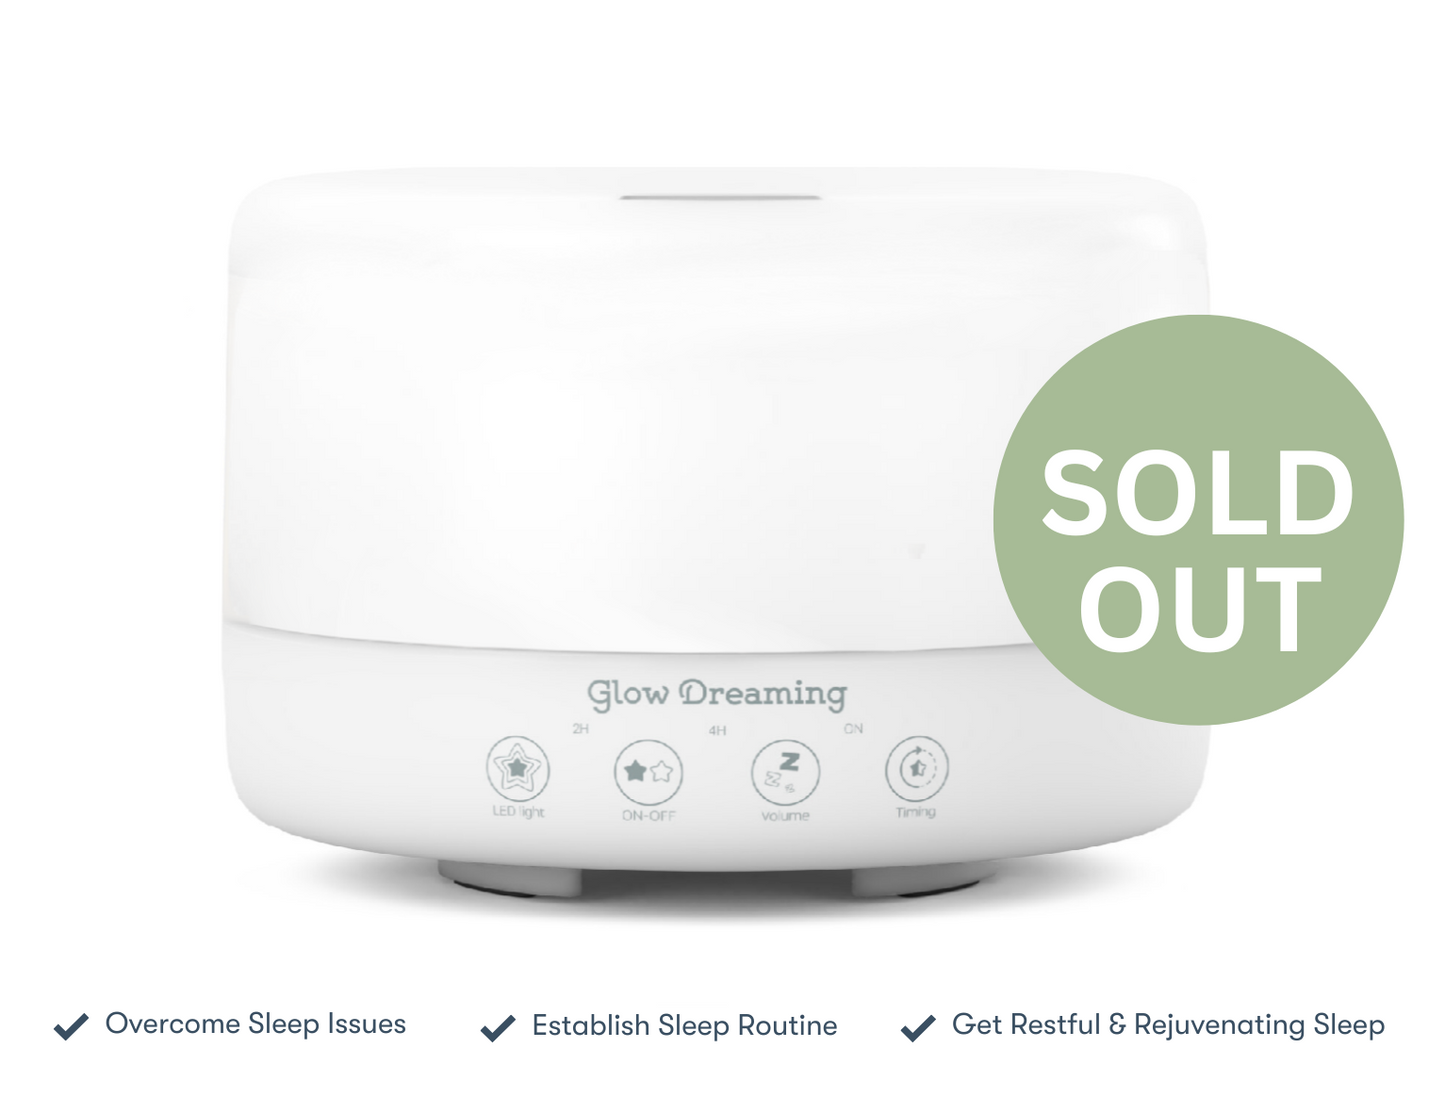 Glow Dreaming Sleep Aid (Previous Model) - SOLD OUT